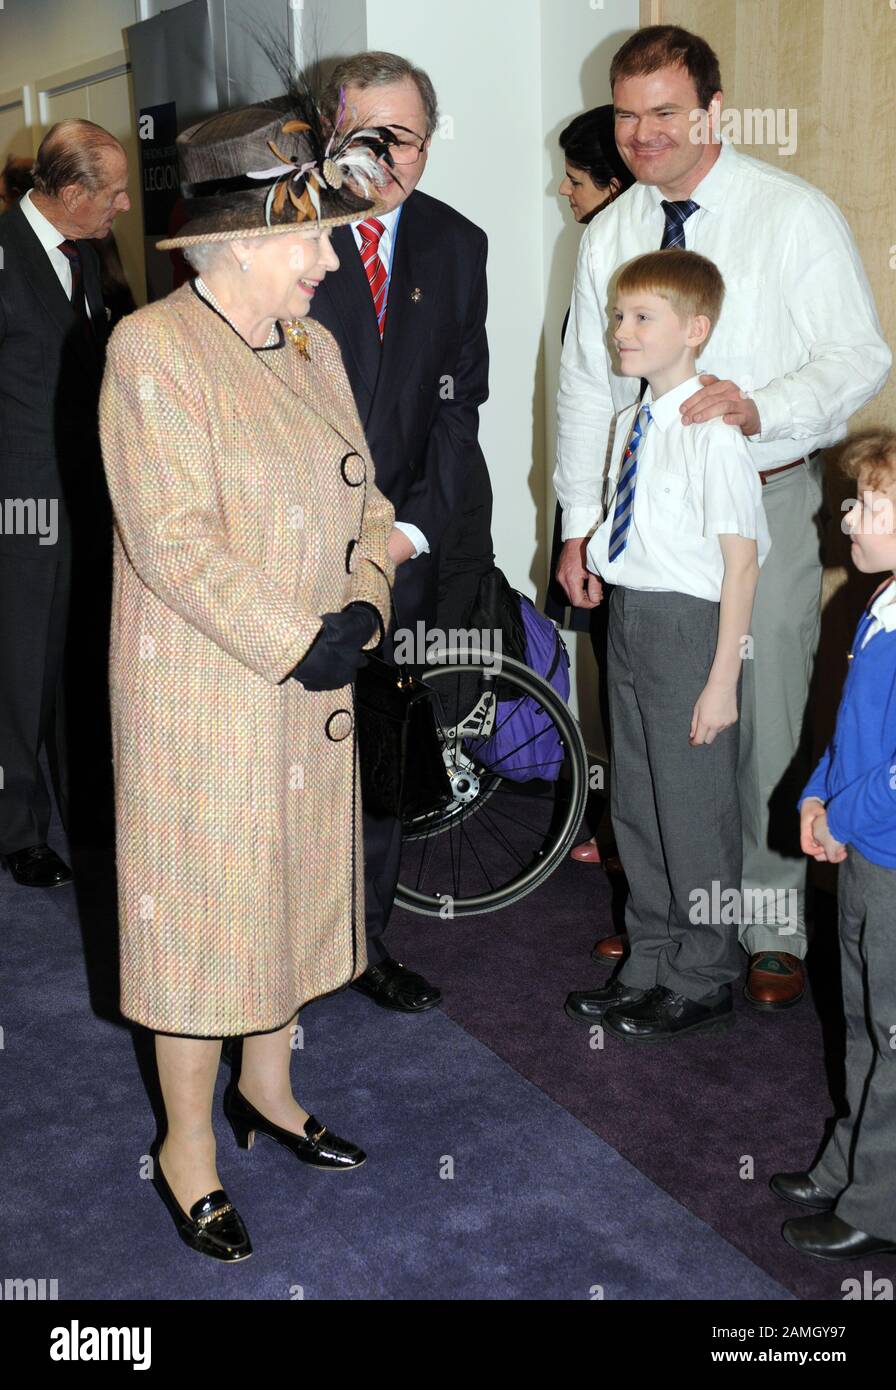 9 year old George Taylor official club campaigner for the British legion  meeting  the H.M. The Queen at the opening of the new British legion in 2009. Stock Photo